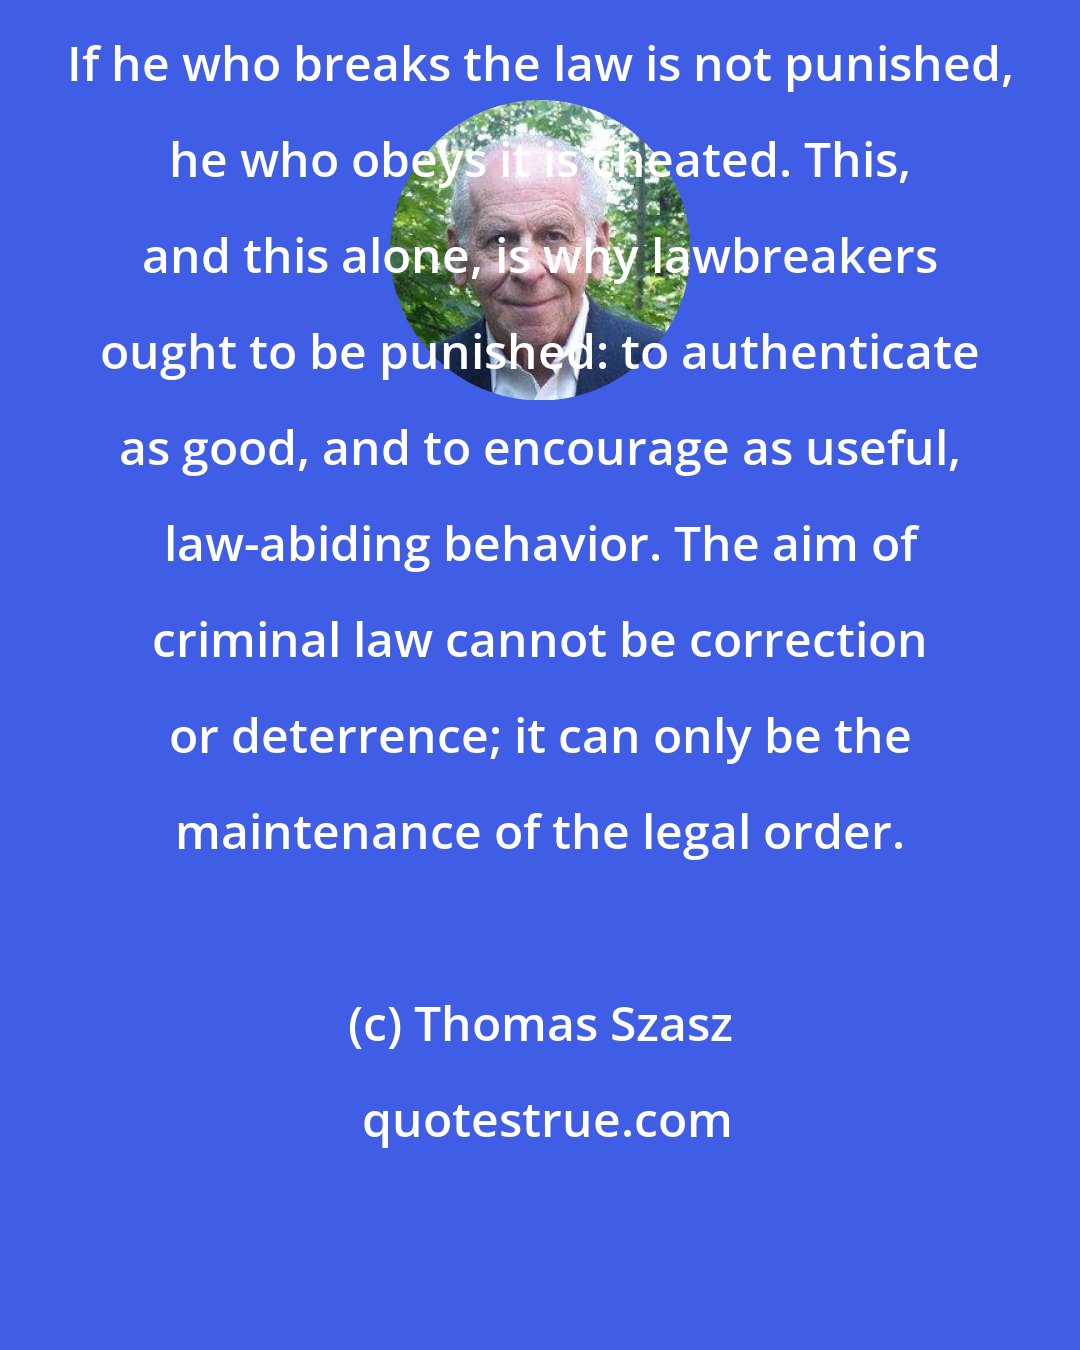 Thomas Szasz: If he who breaks the law is not punished, he who obeys it is cheated. This, and this alone, is why lawbreakers ought to be punished: to authenticate as good, and to encourage as useful, law-abiding behavior. The aim of criminal law cannot be correction or deterrence; it can only be the maintenance of the legal order.